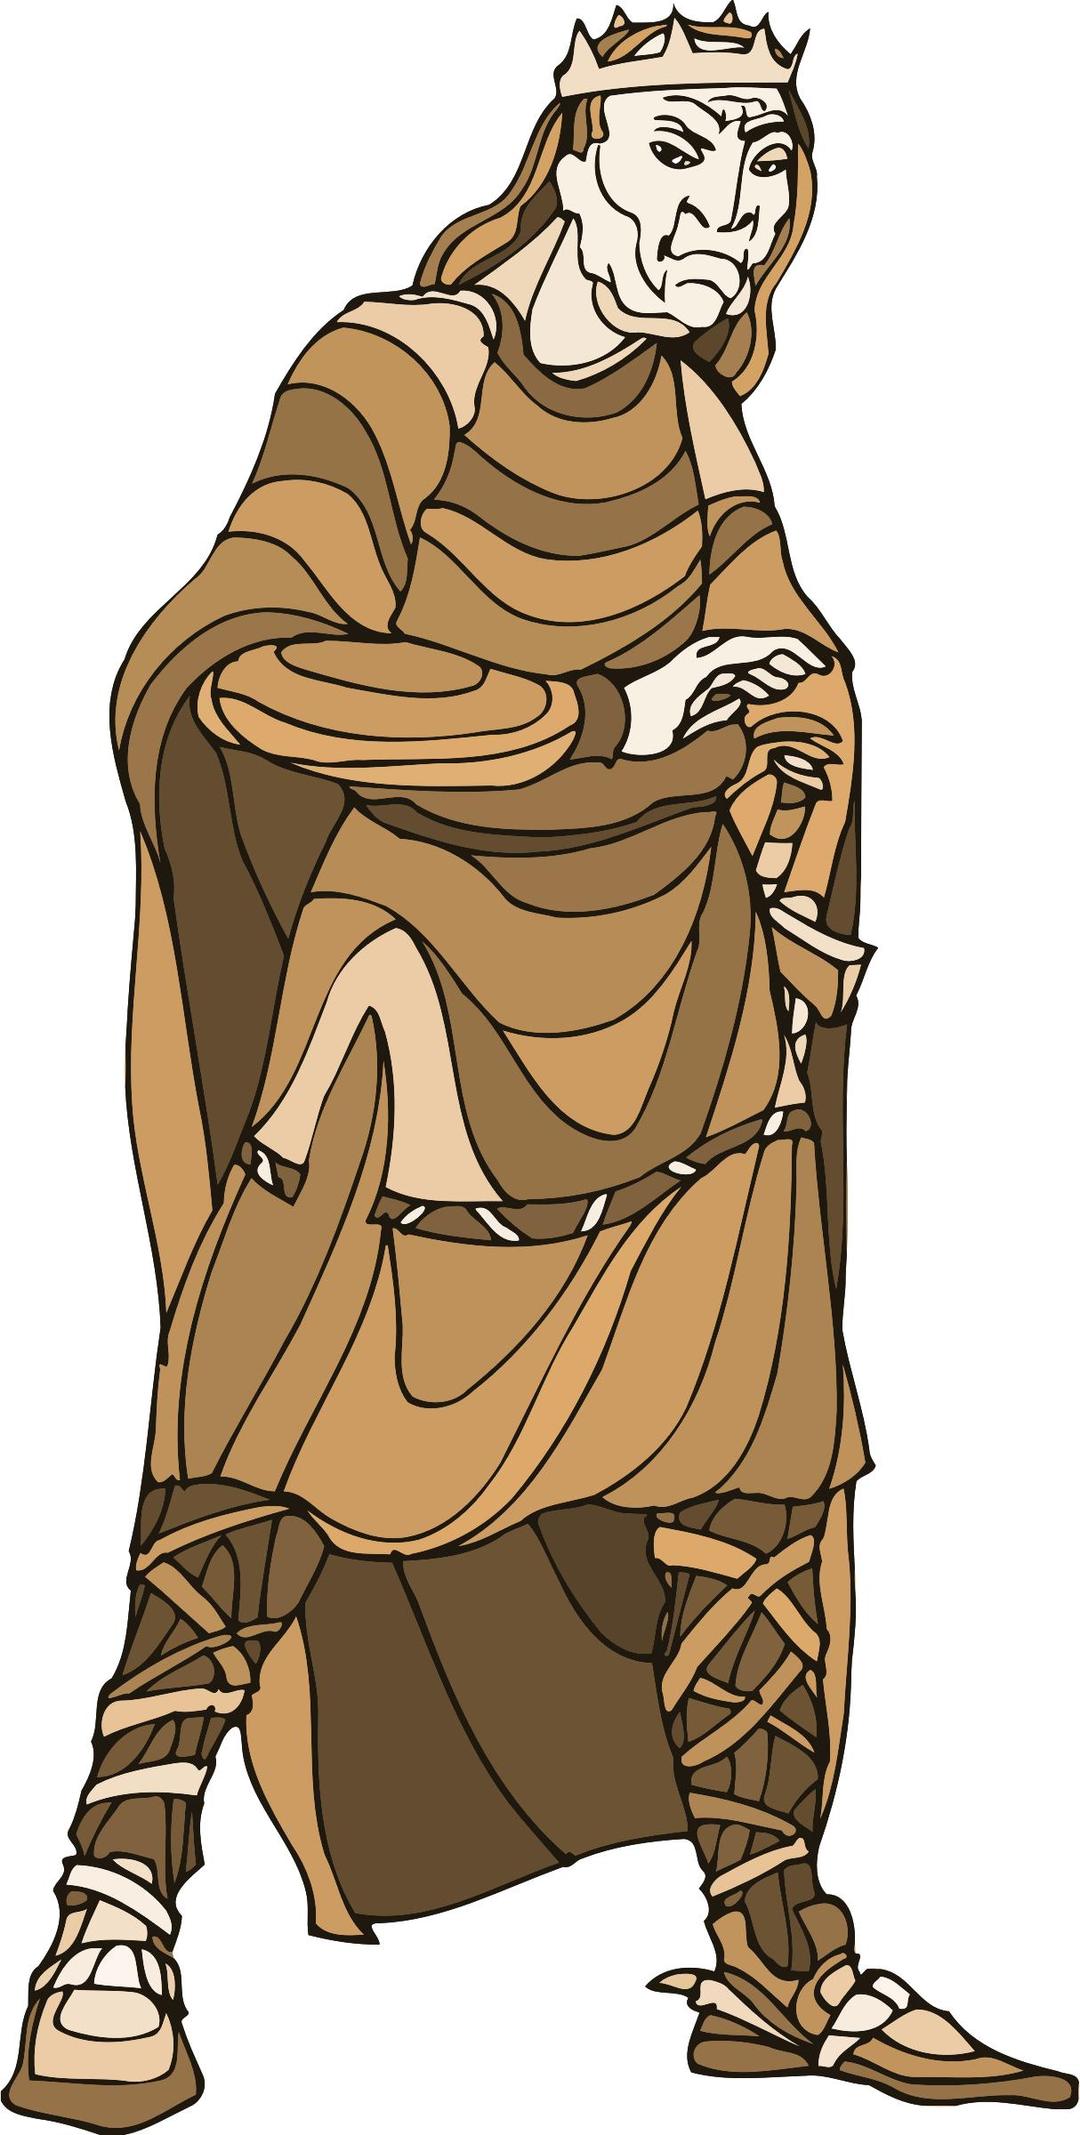 Shakespeare characters - old king png transparent